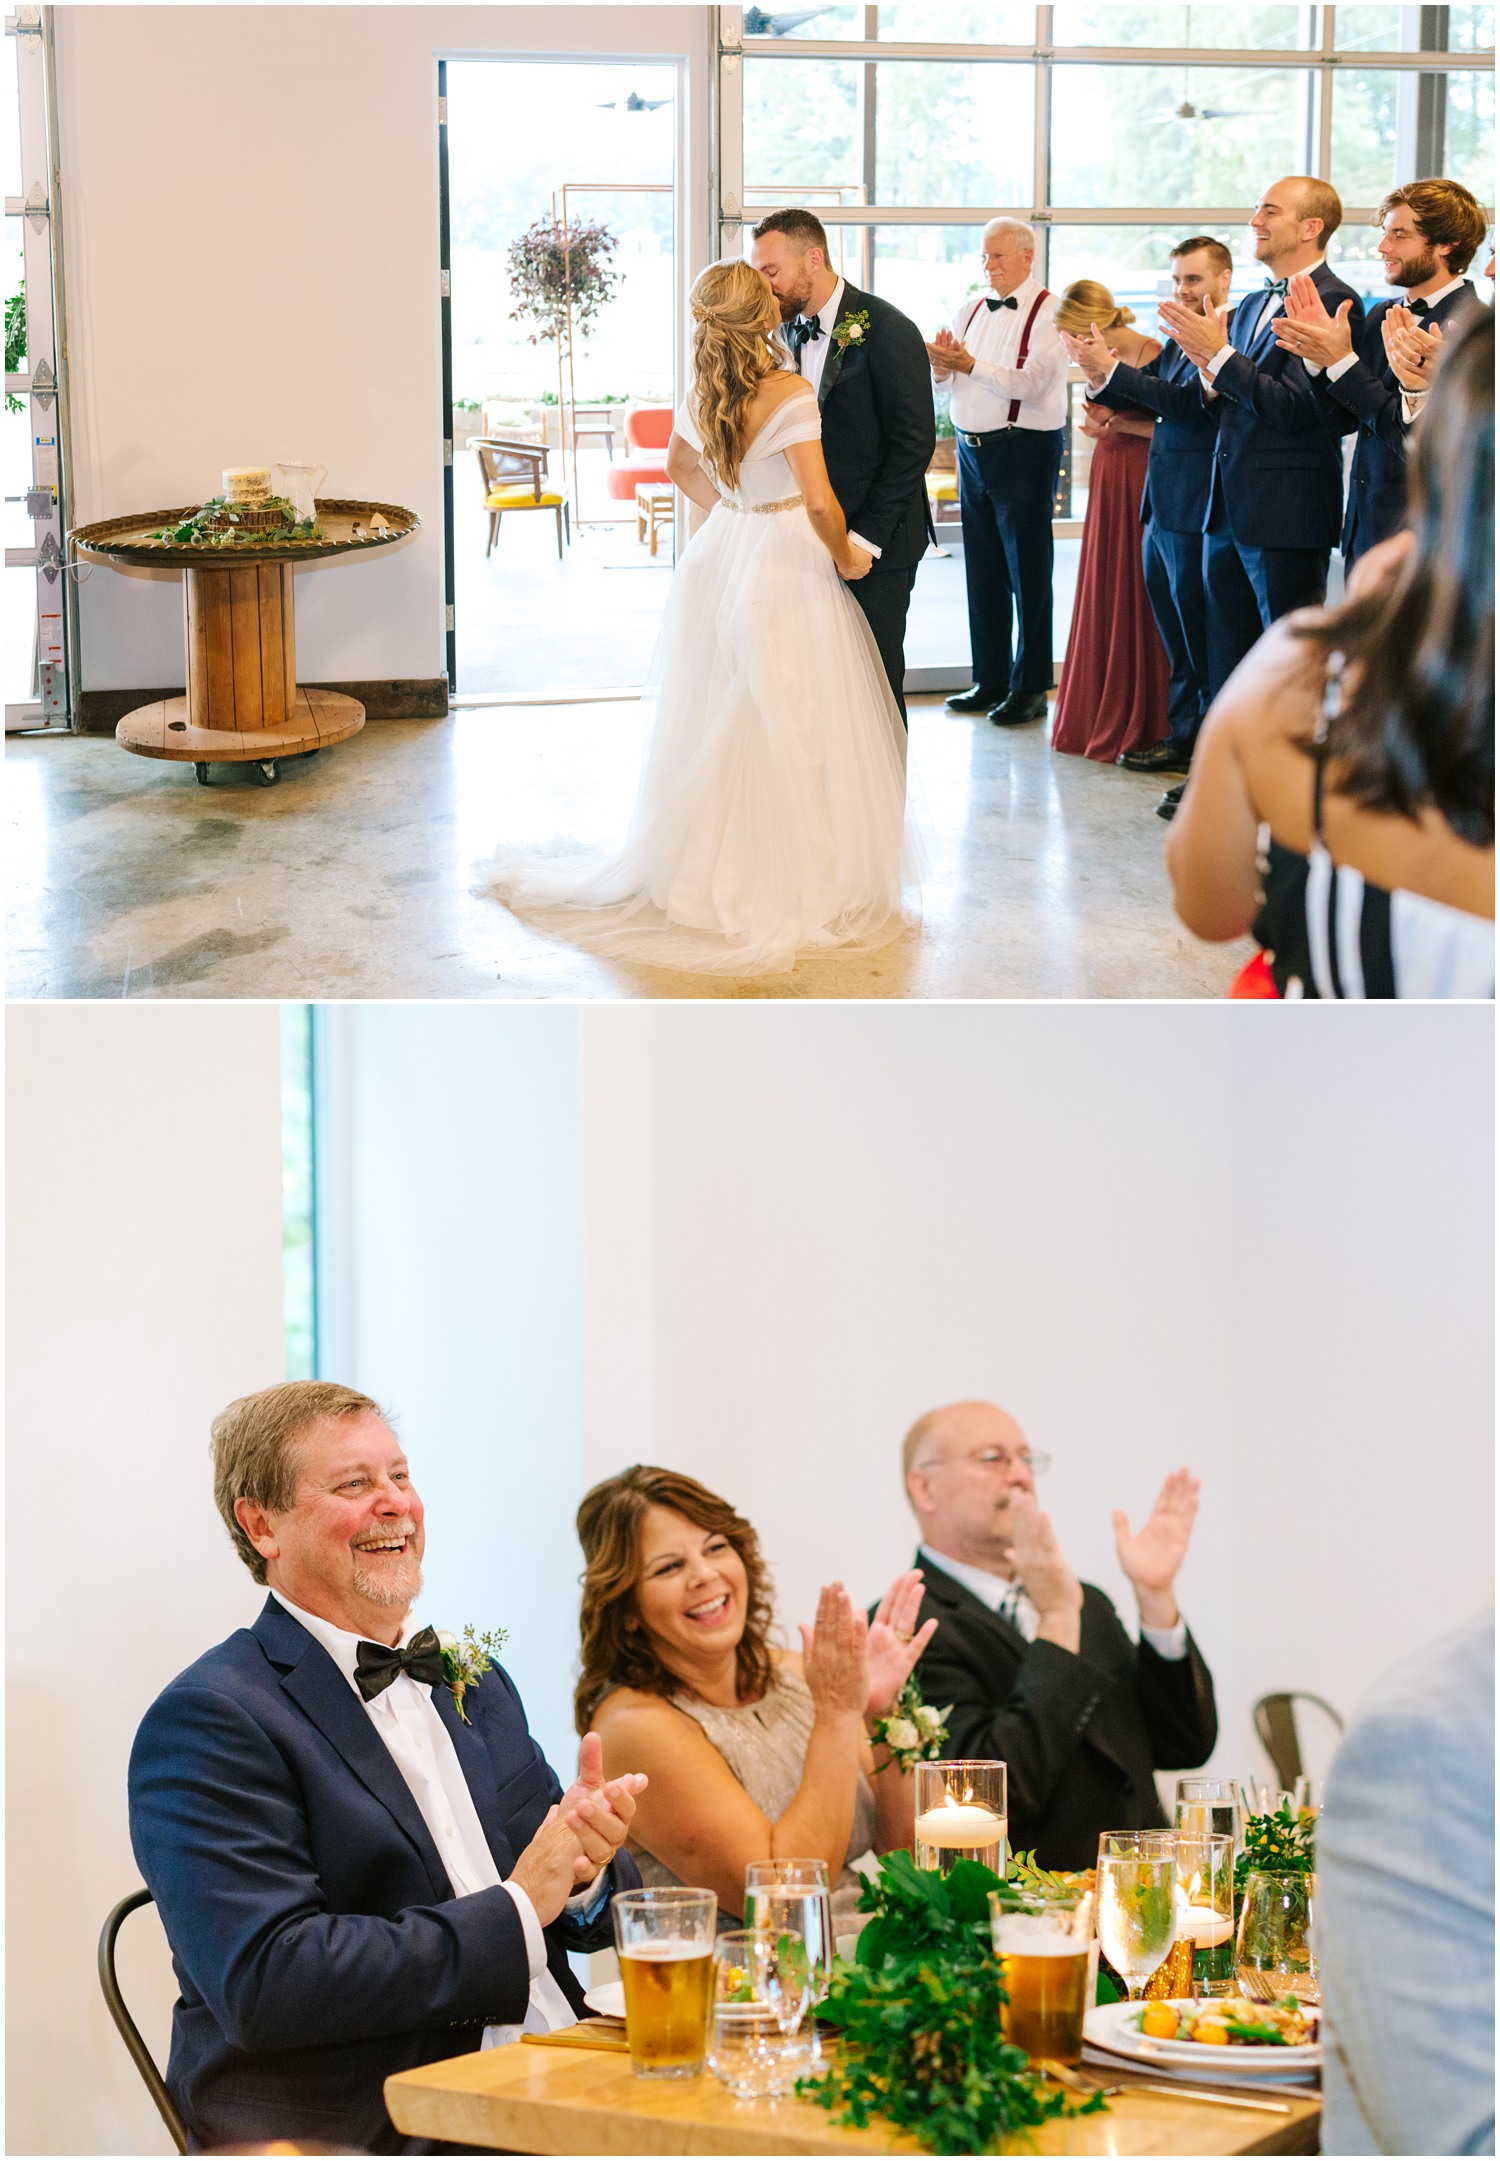 guests welcome newlyweds to The Meadows Raleigh wedding reception